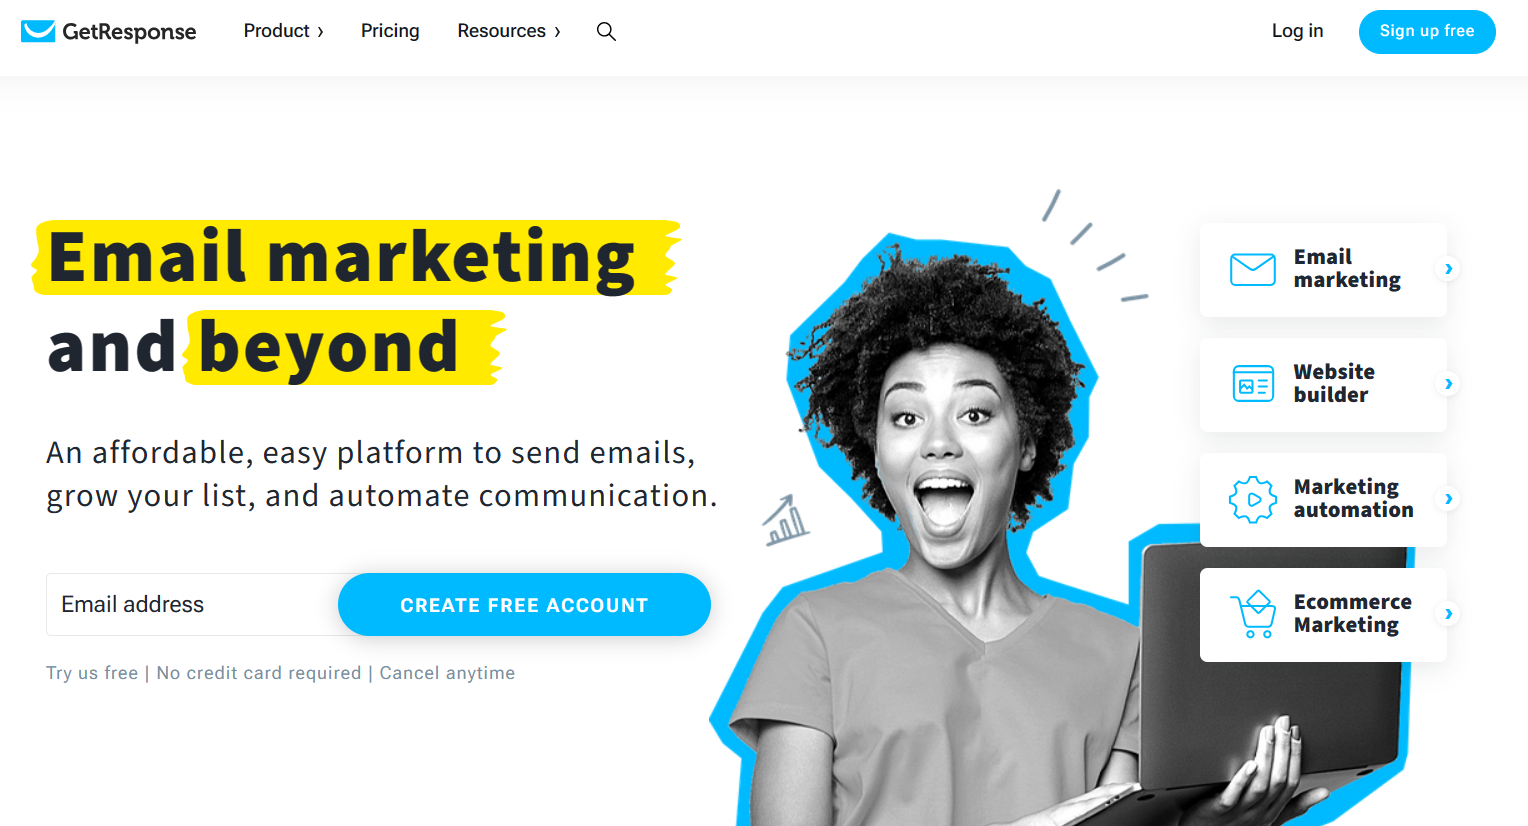 GetResponse Features: Exploring the Key Capabilities and Benefits of the Email Marketing Platform